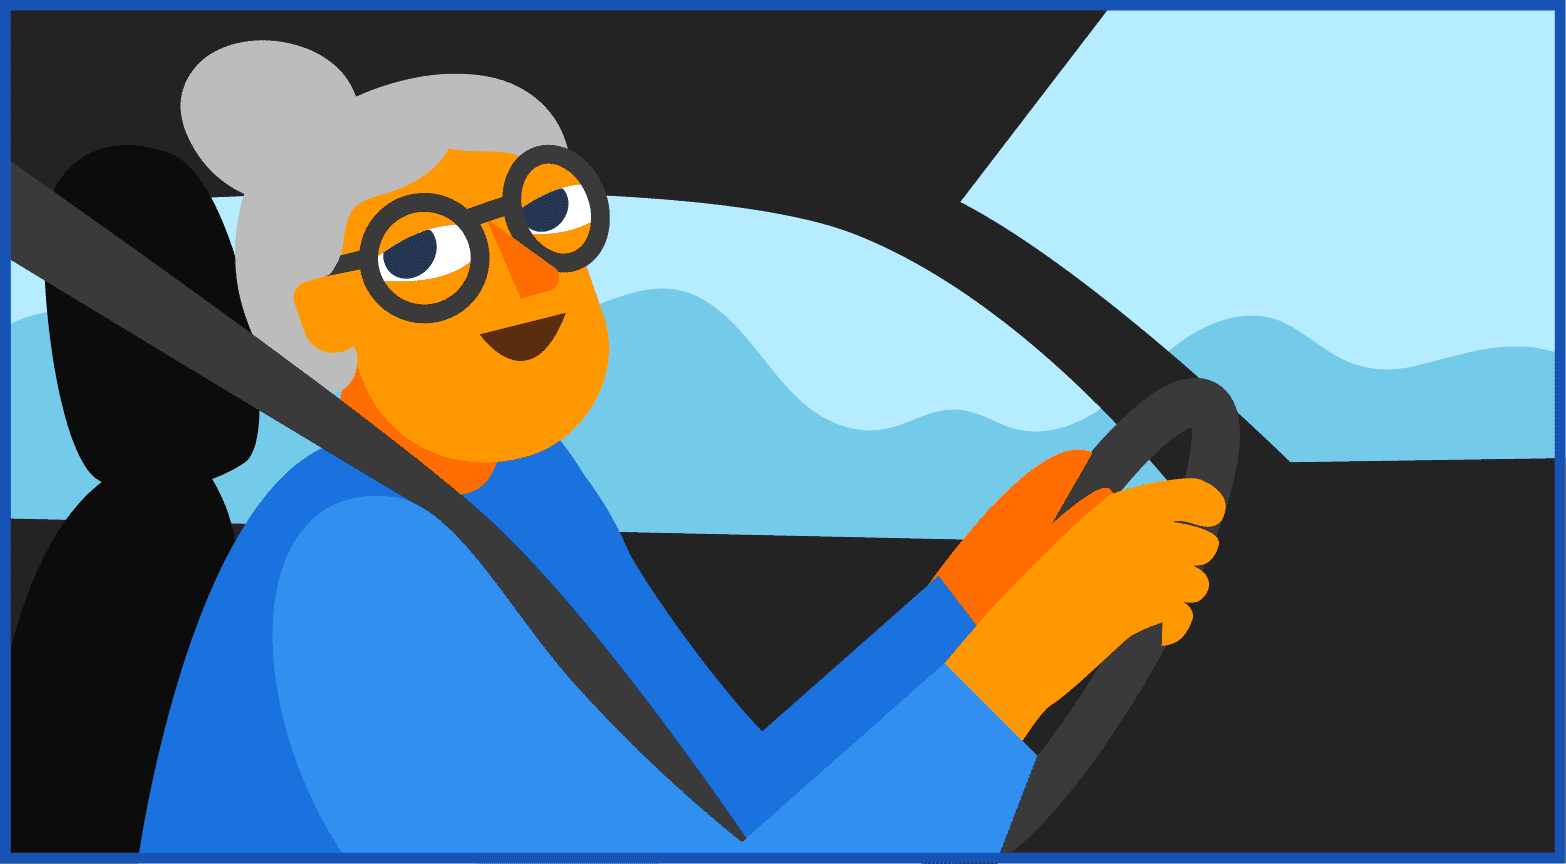 Common Restricted Licenses for Senior Drivers in California